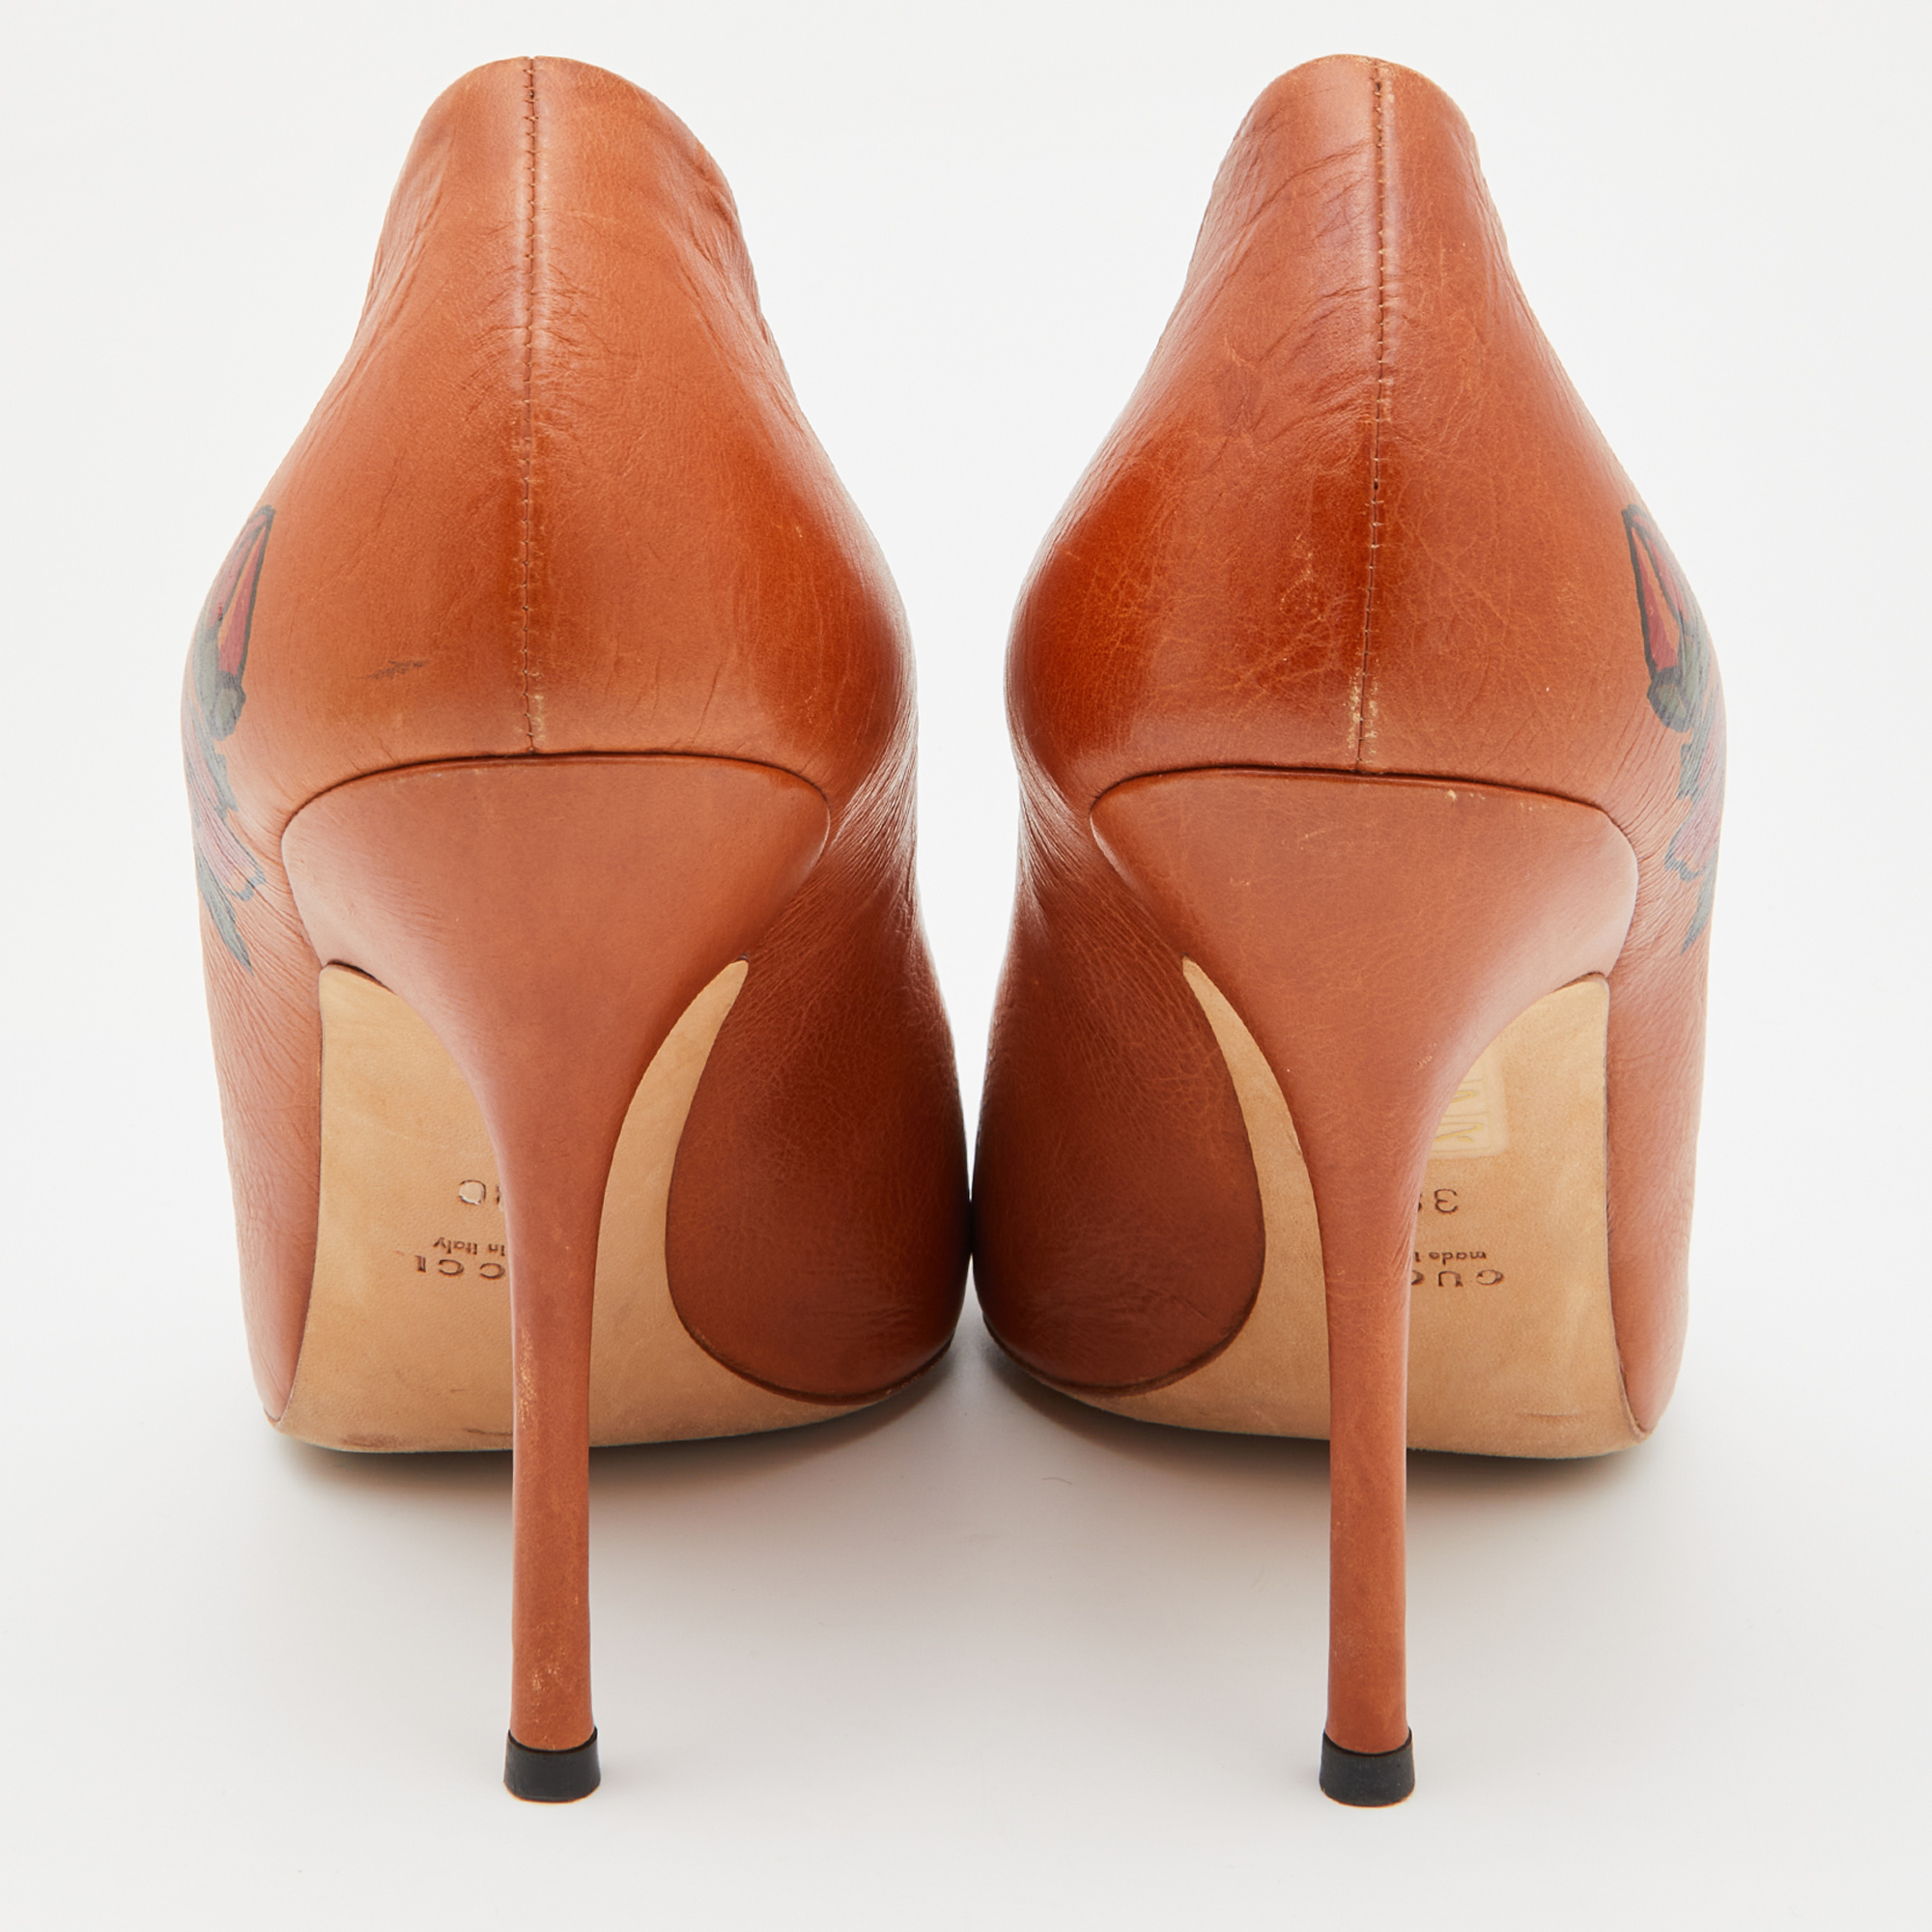 Gucci Tan Printed Leather Pumps Size 38